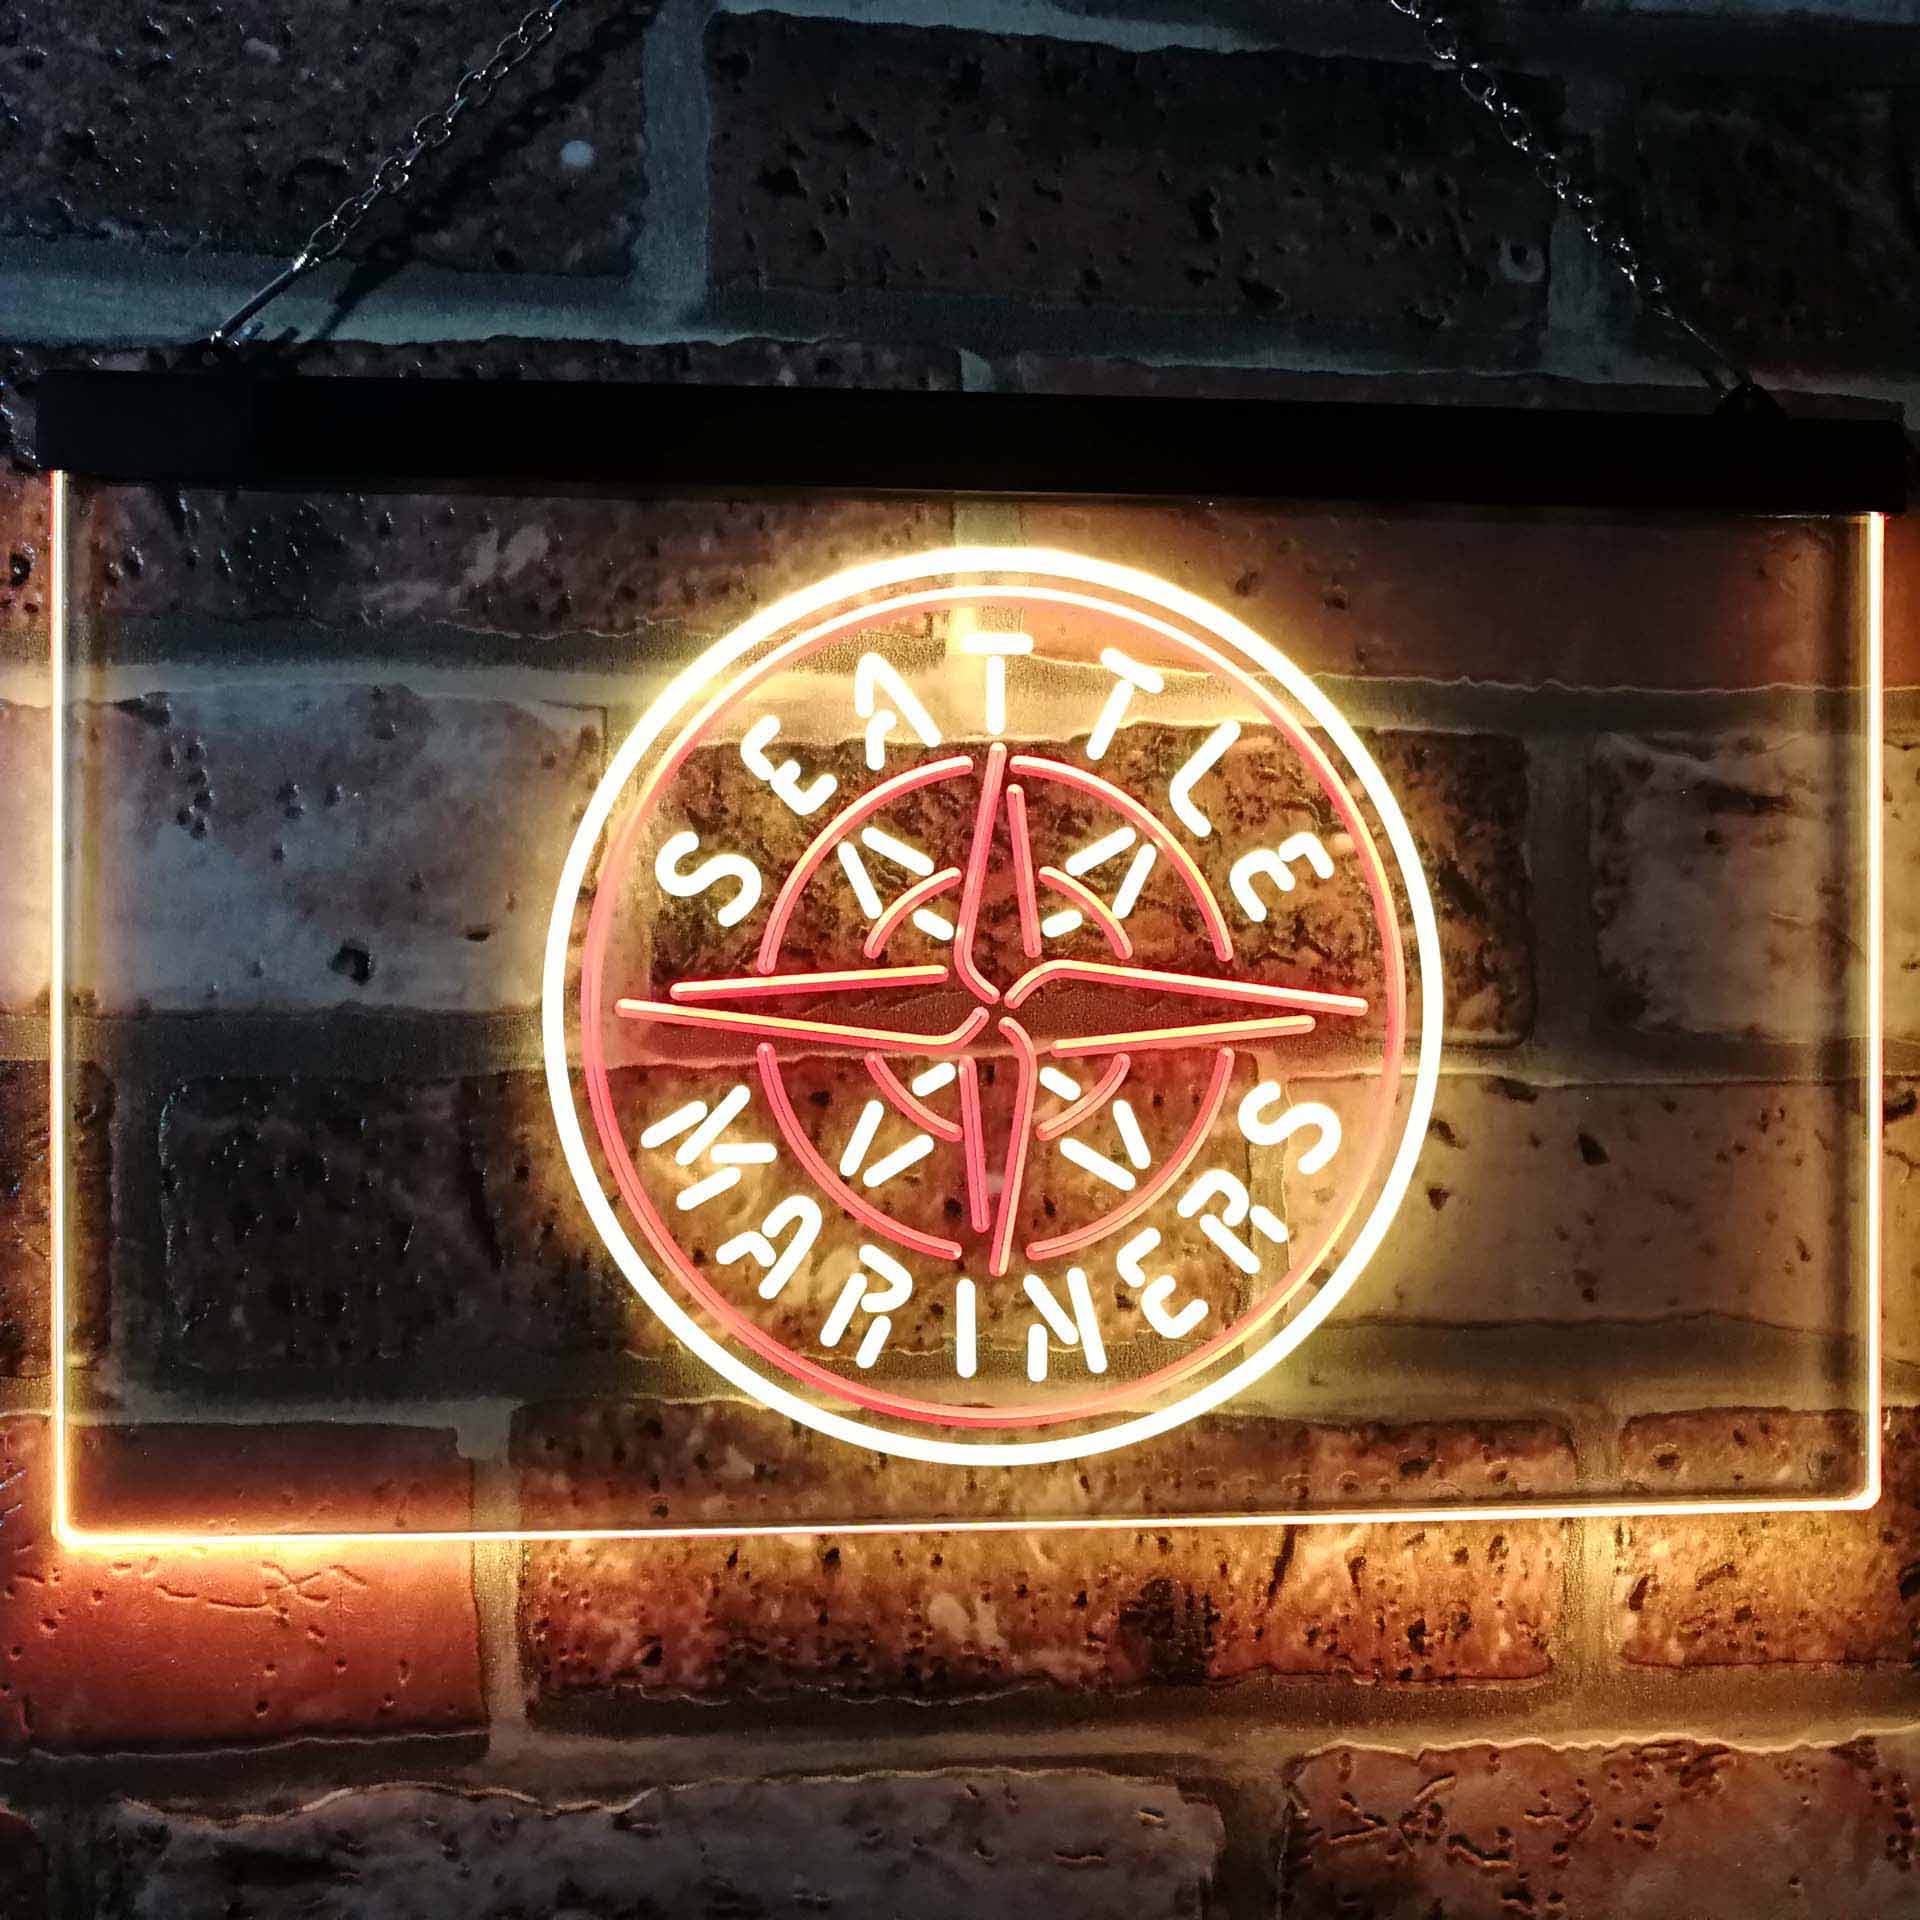 Seattle Mariners LED Neon Sign